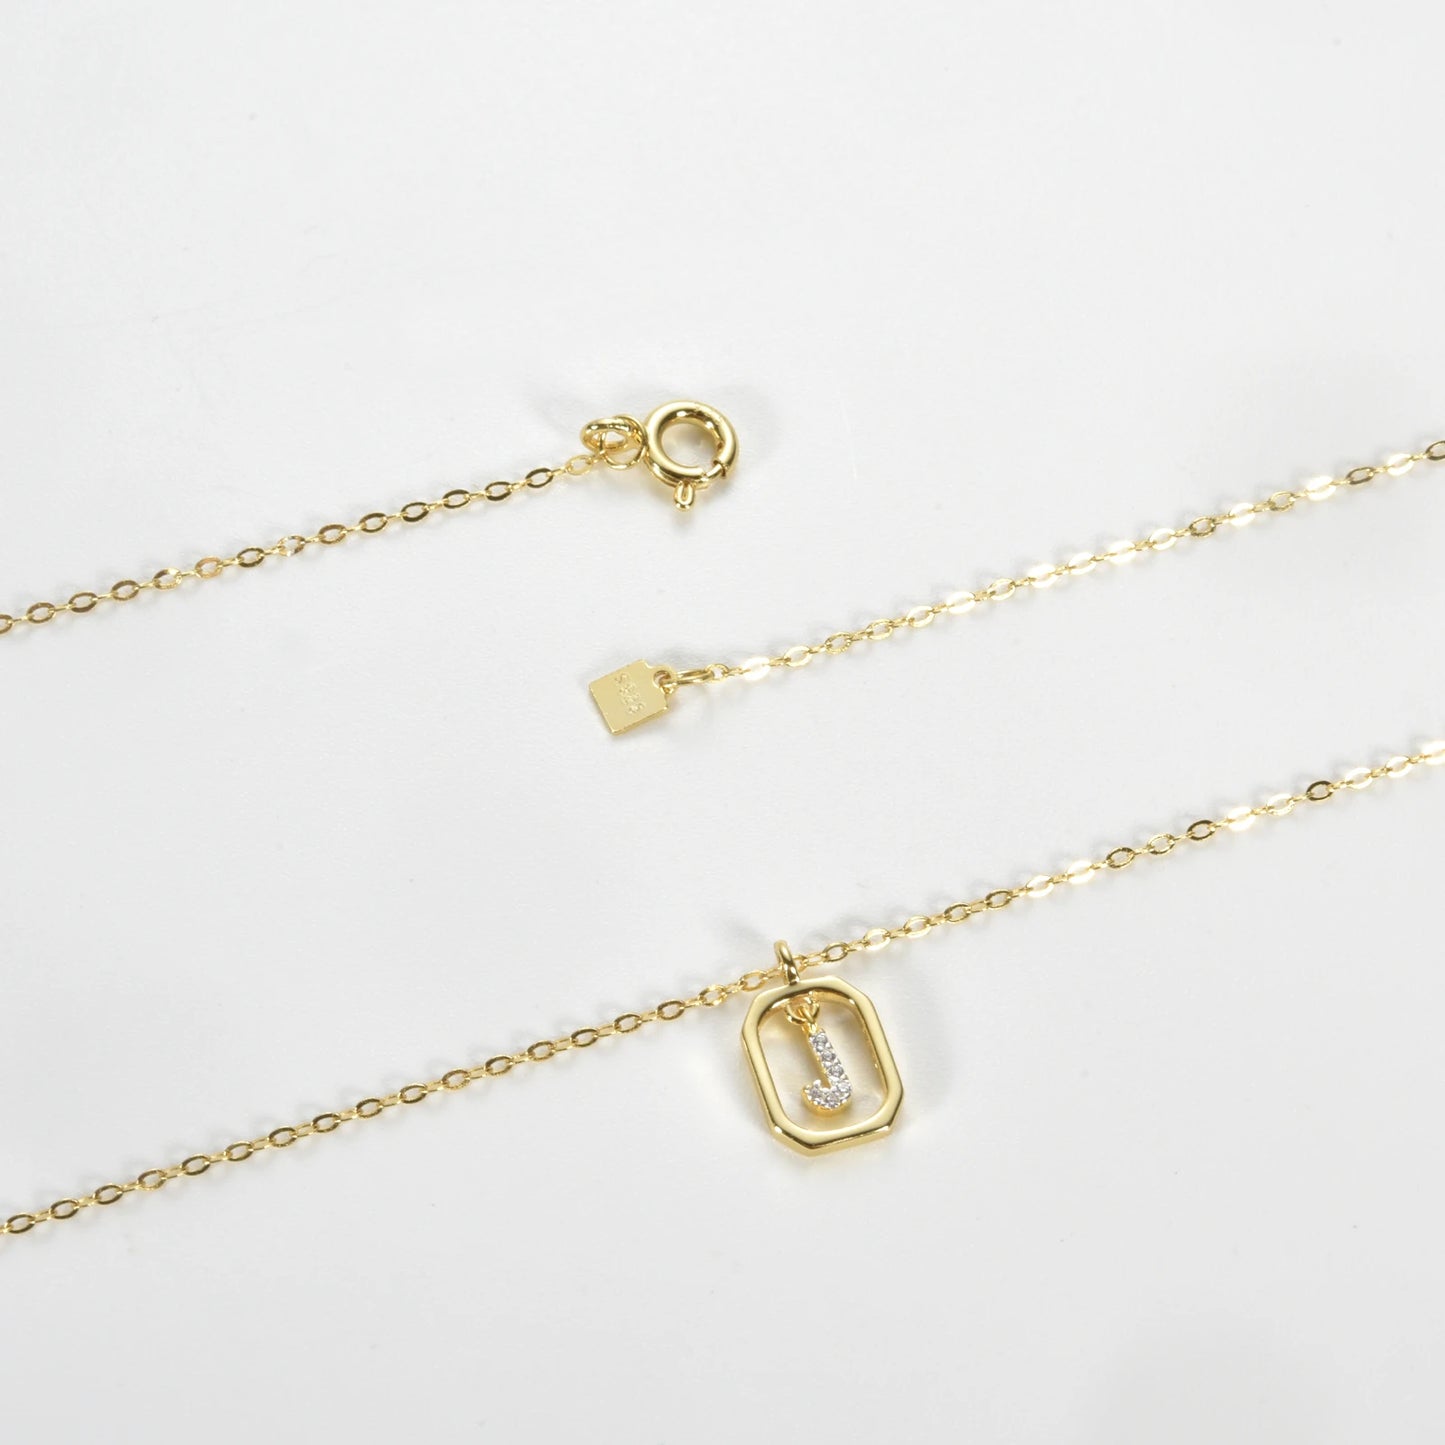 IceBox DC Personalized Collection - Gold Initial with Zirconia Alphabet Pendant Necklace - Letters A-Z - Hip Hop Fashion Jewelry